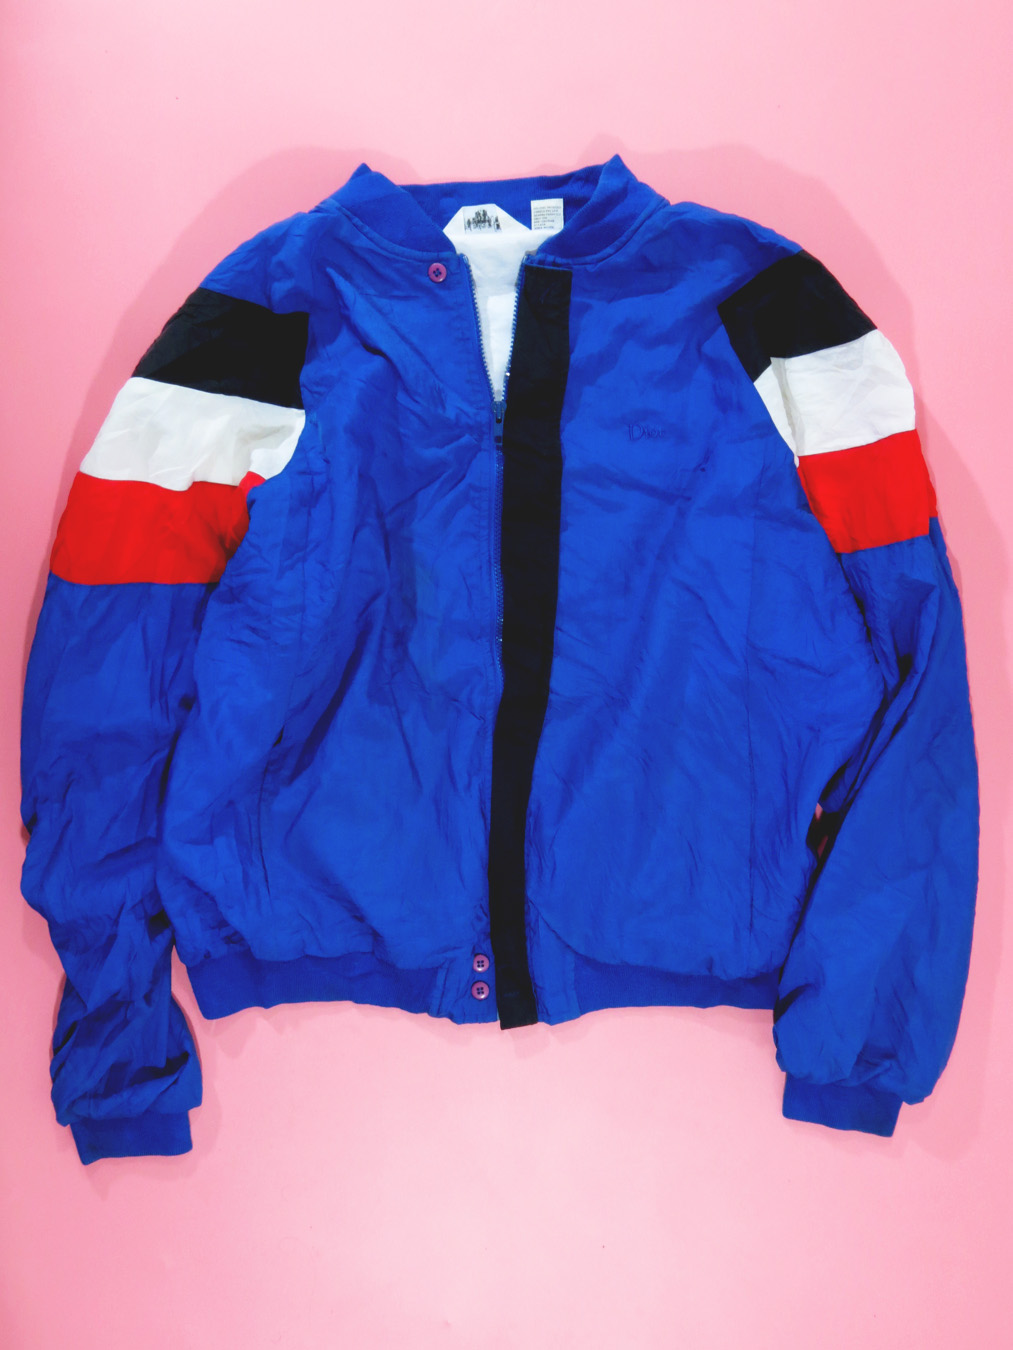 Christian Dior Red White Blue Lined Windbreaker - 5 Star Vintage